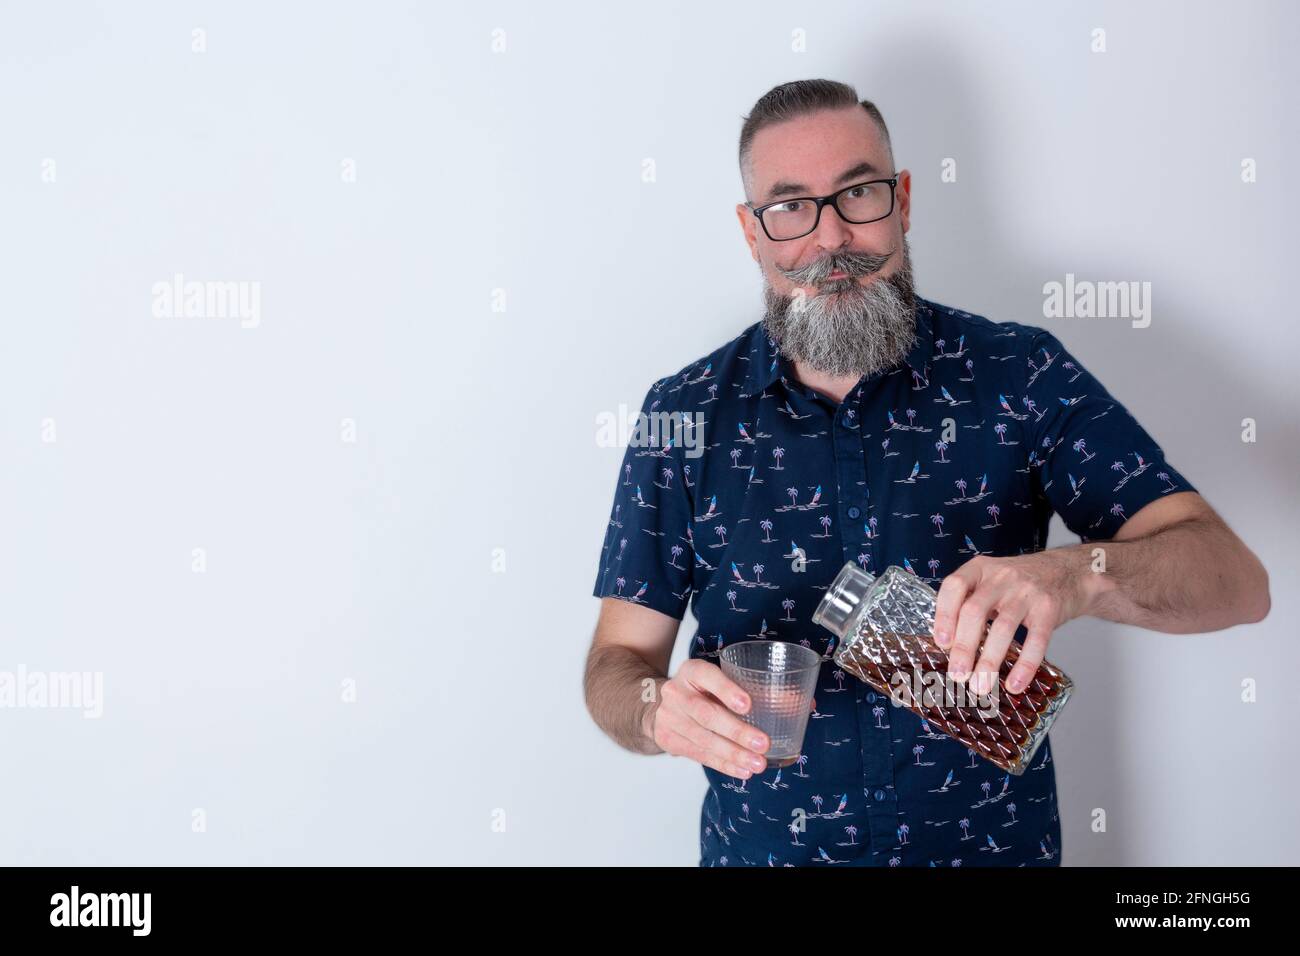 Retro look hipster with big beard and glasses, 40-45 years old, Caucasian,  holding old liquor bottle and looking straight ahead Stock Photo - Alamy